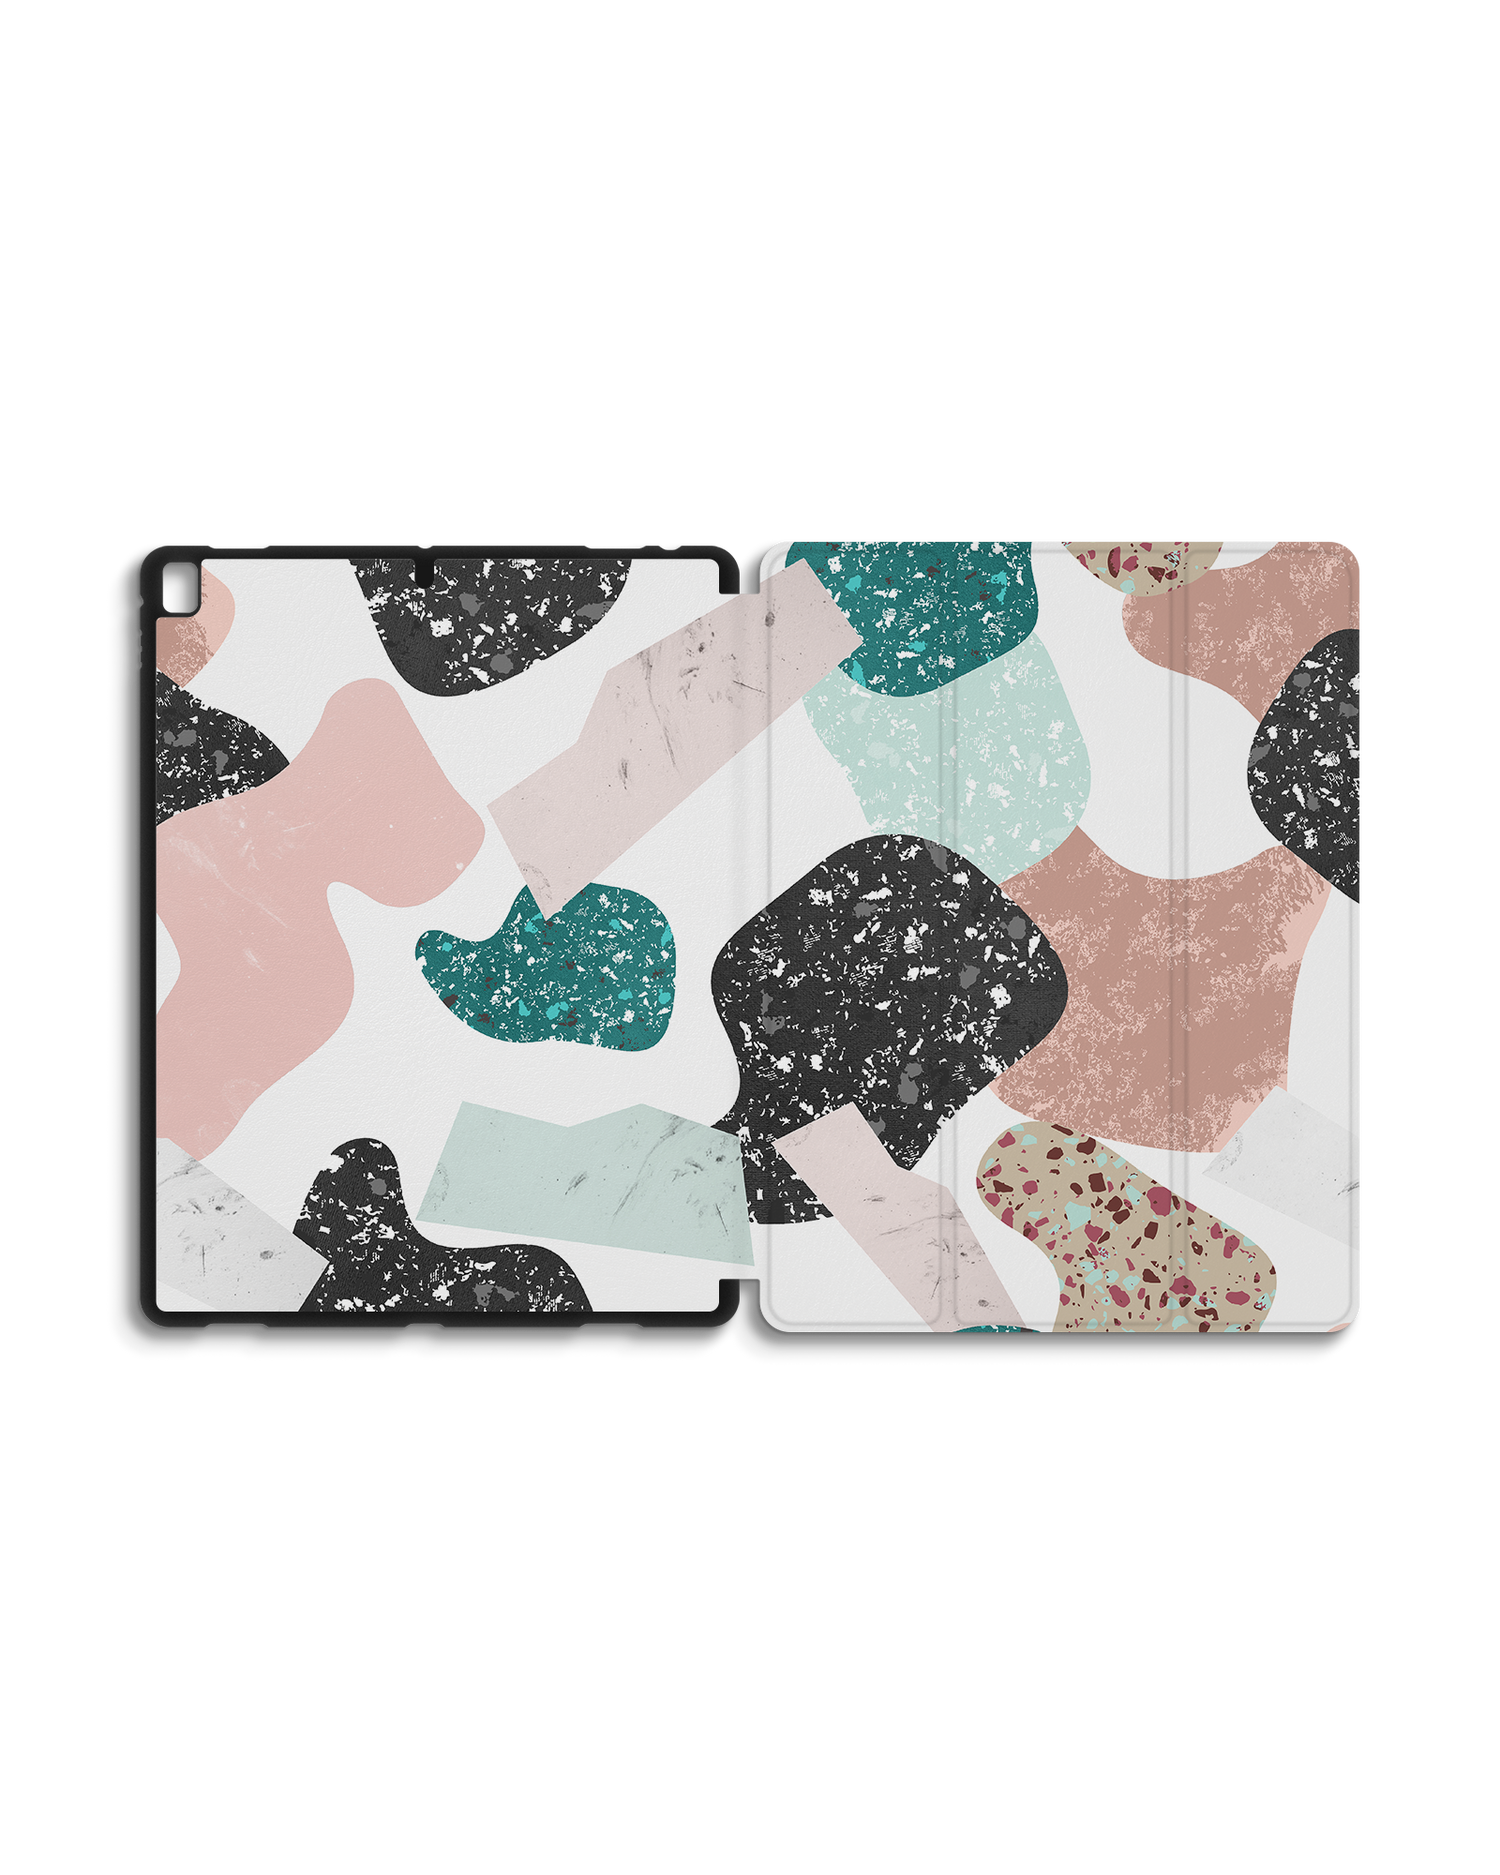 Scattered Shapes iPad Case with Pencil Holder for Apple iPad Pro 2 12.9